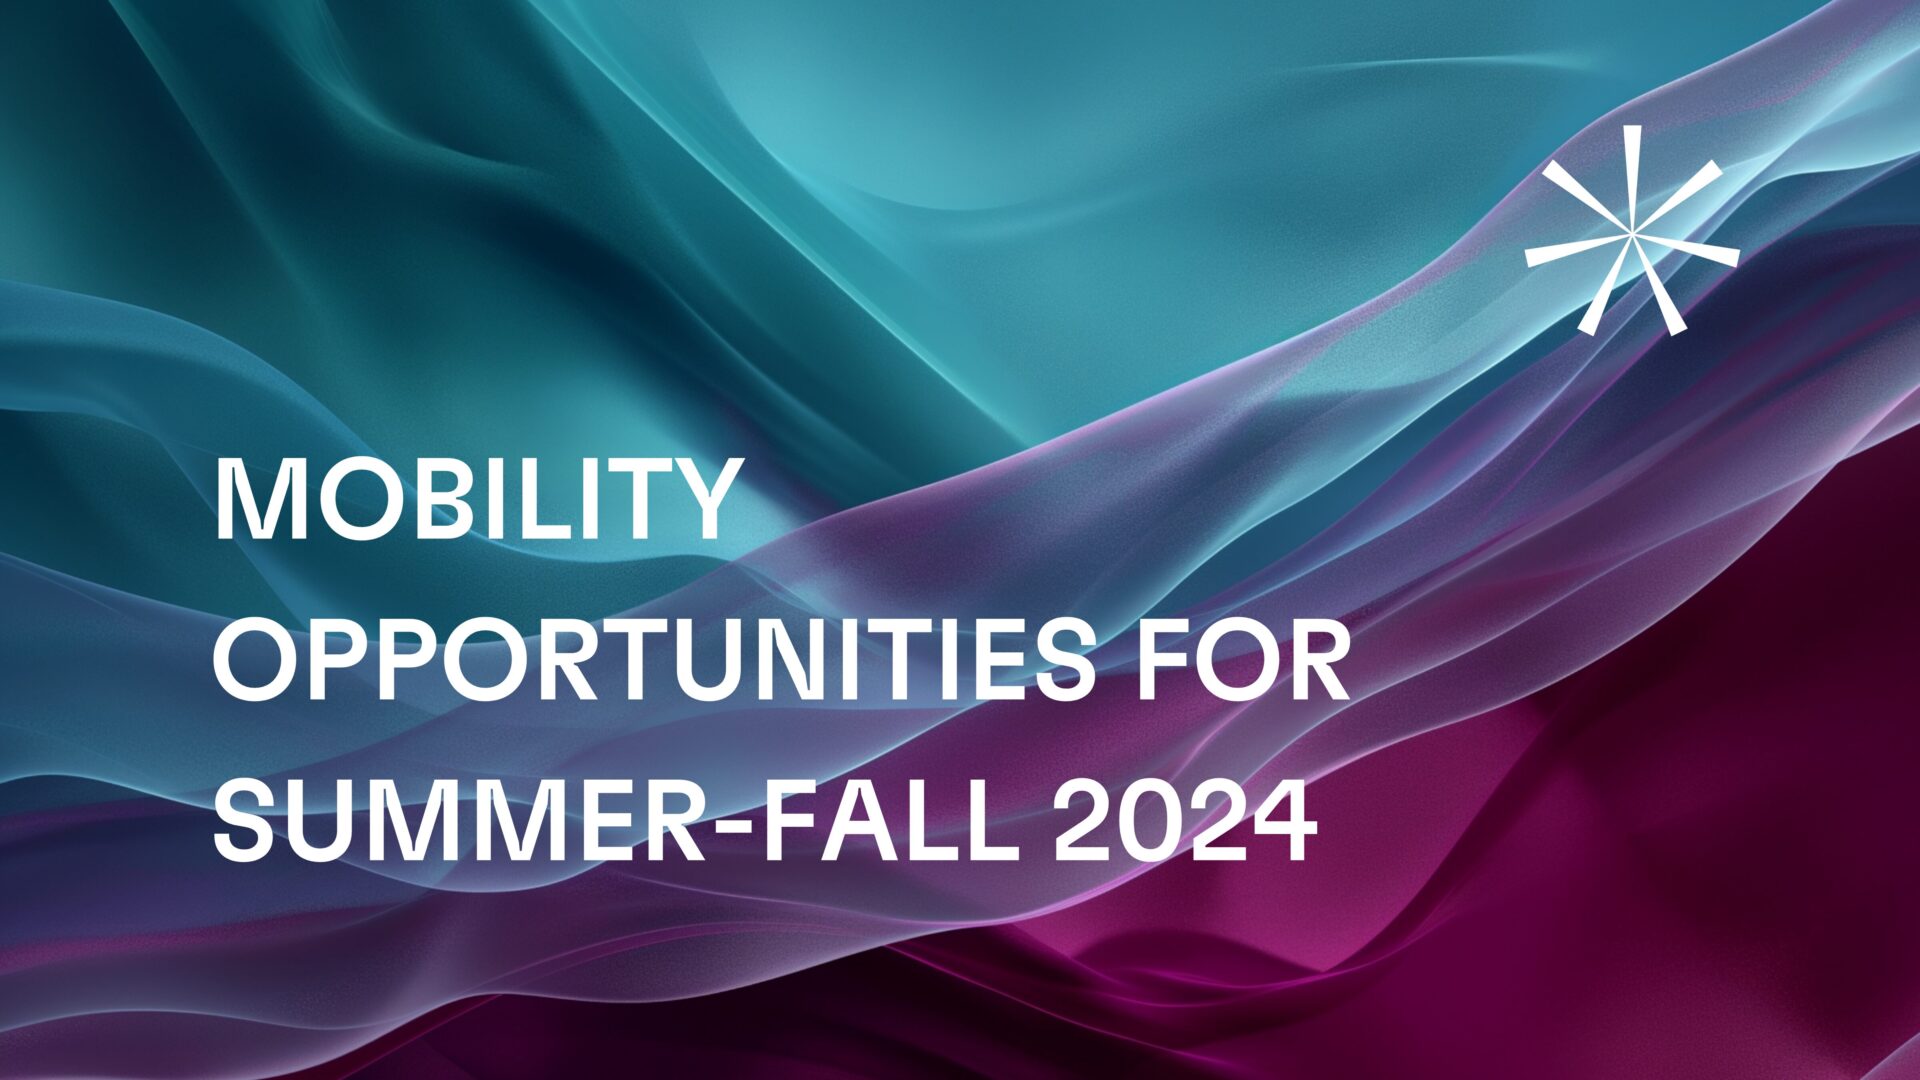 MOBILITY OPPORTUNITIES FOR SPRING - SUMMER 2024